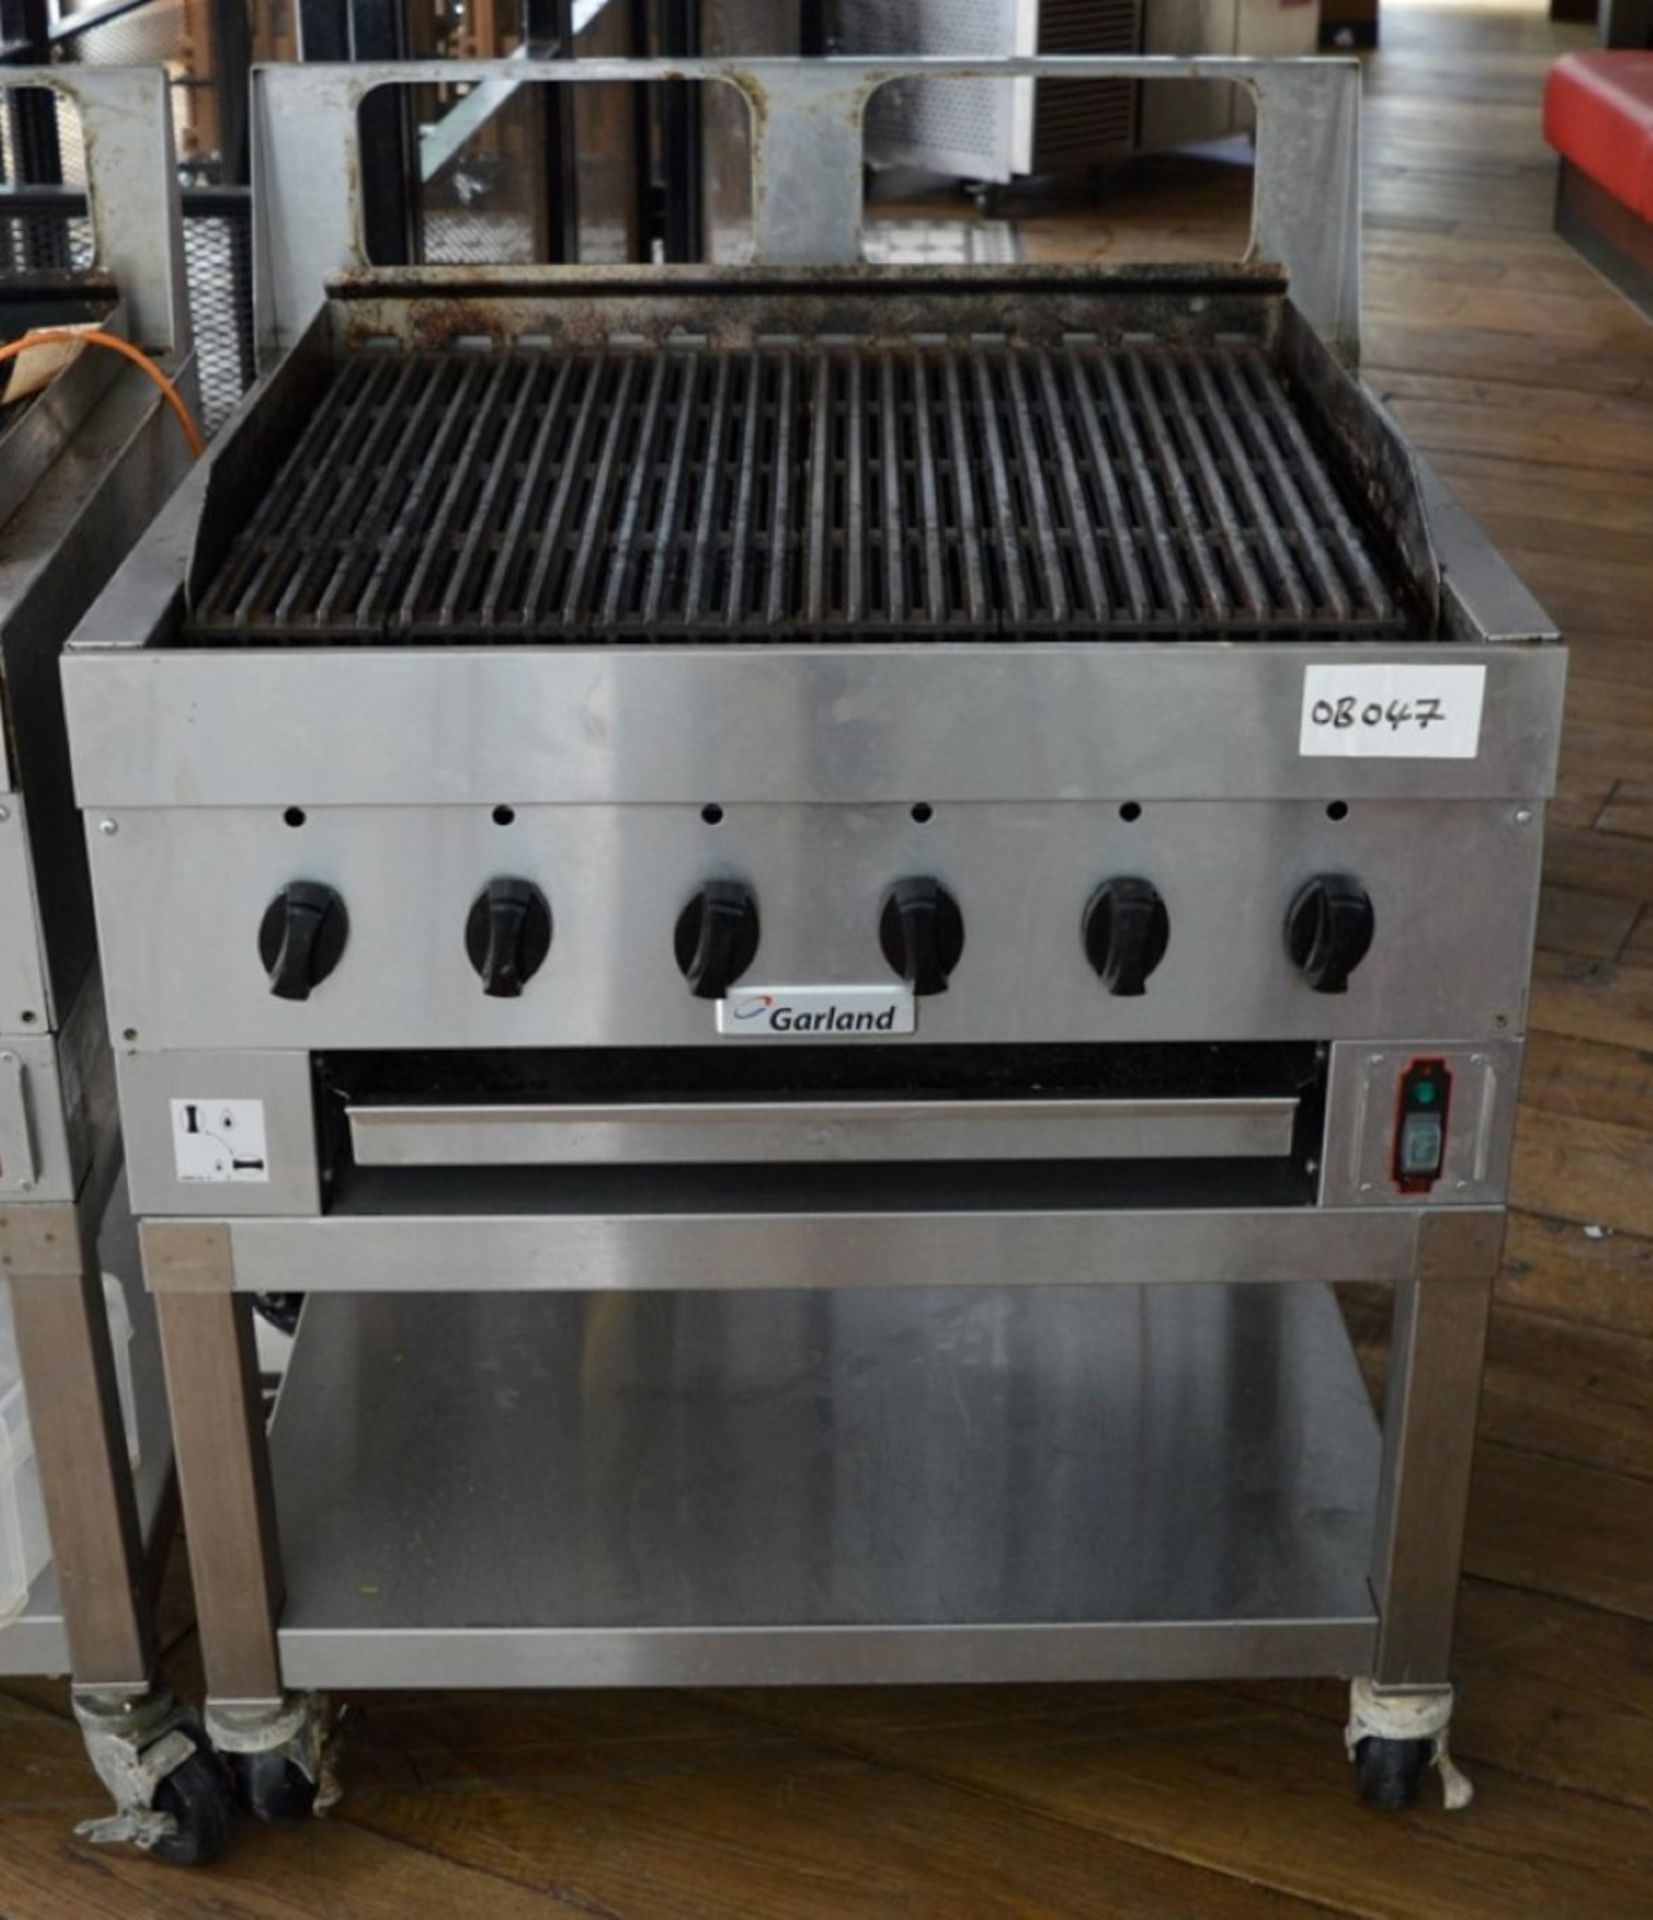 1 x Garland Griddle With Stand - H91 x W85 x D75cms - Stainless Steel - CL245 - Dual Fuel Gas and